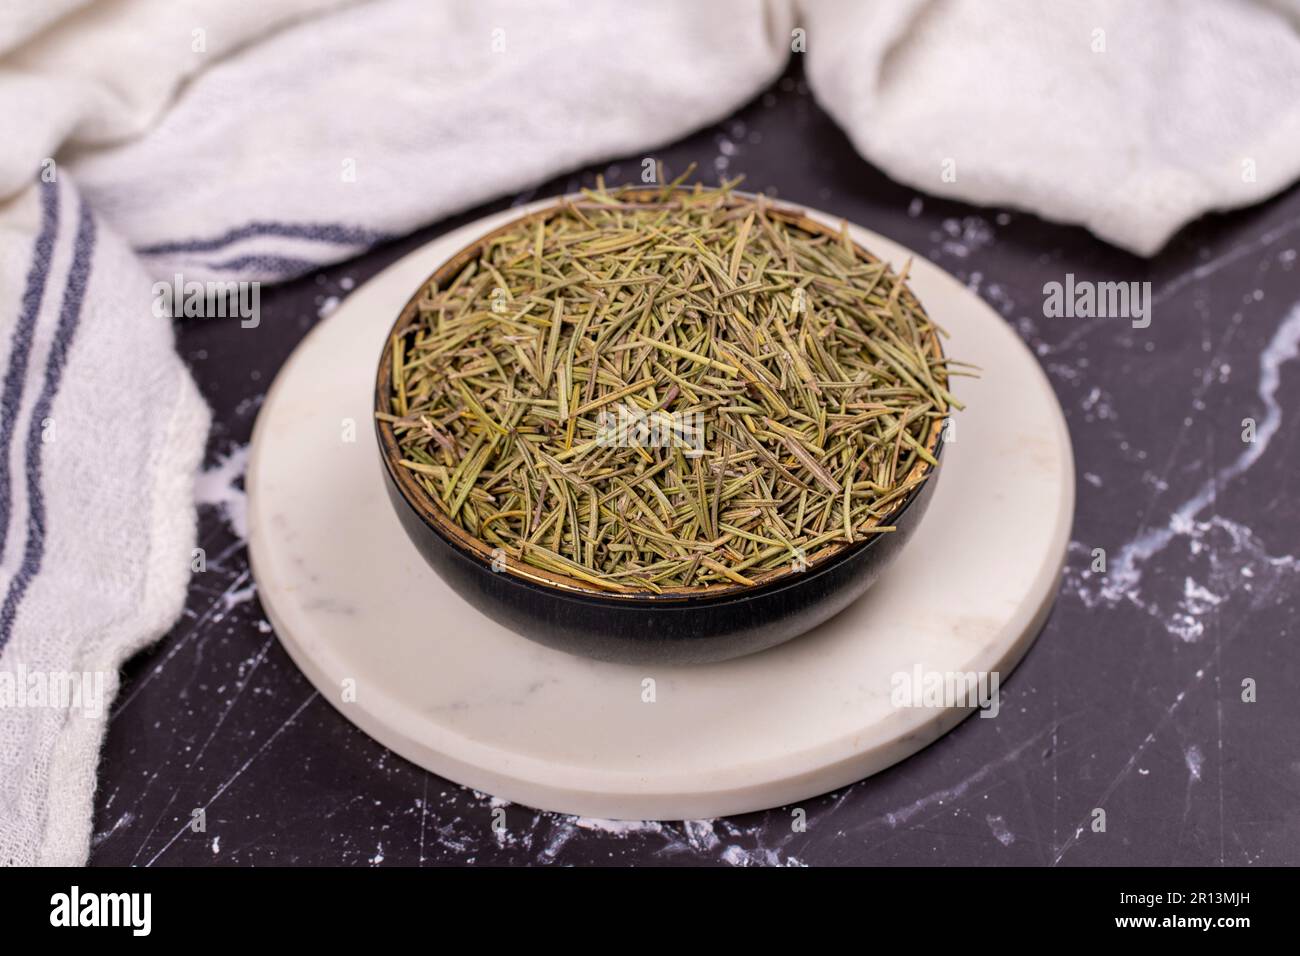 Dried herbs rosemary leaf. Dry seasoning rosemary on dark background. Spices and herbs for cooking, provence herbs Stock Photo